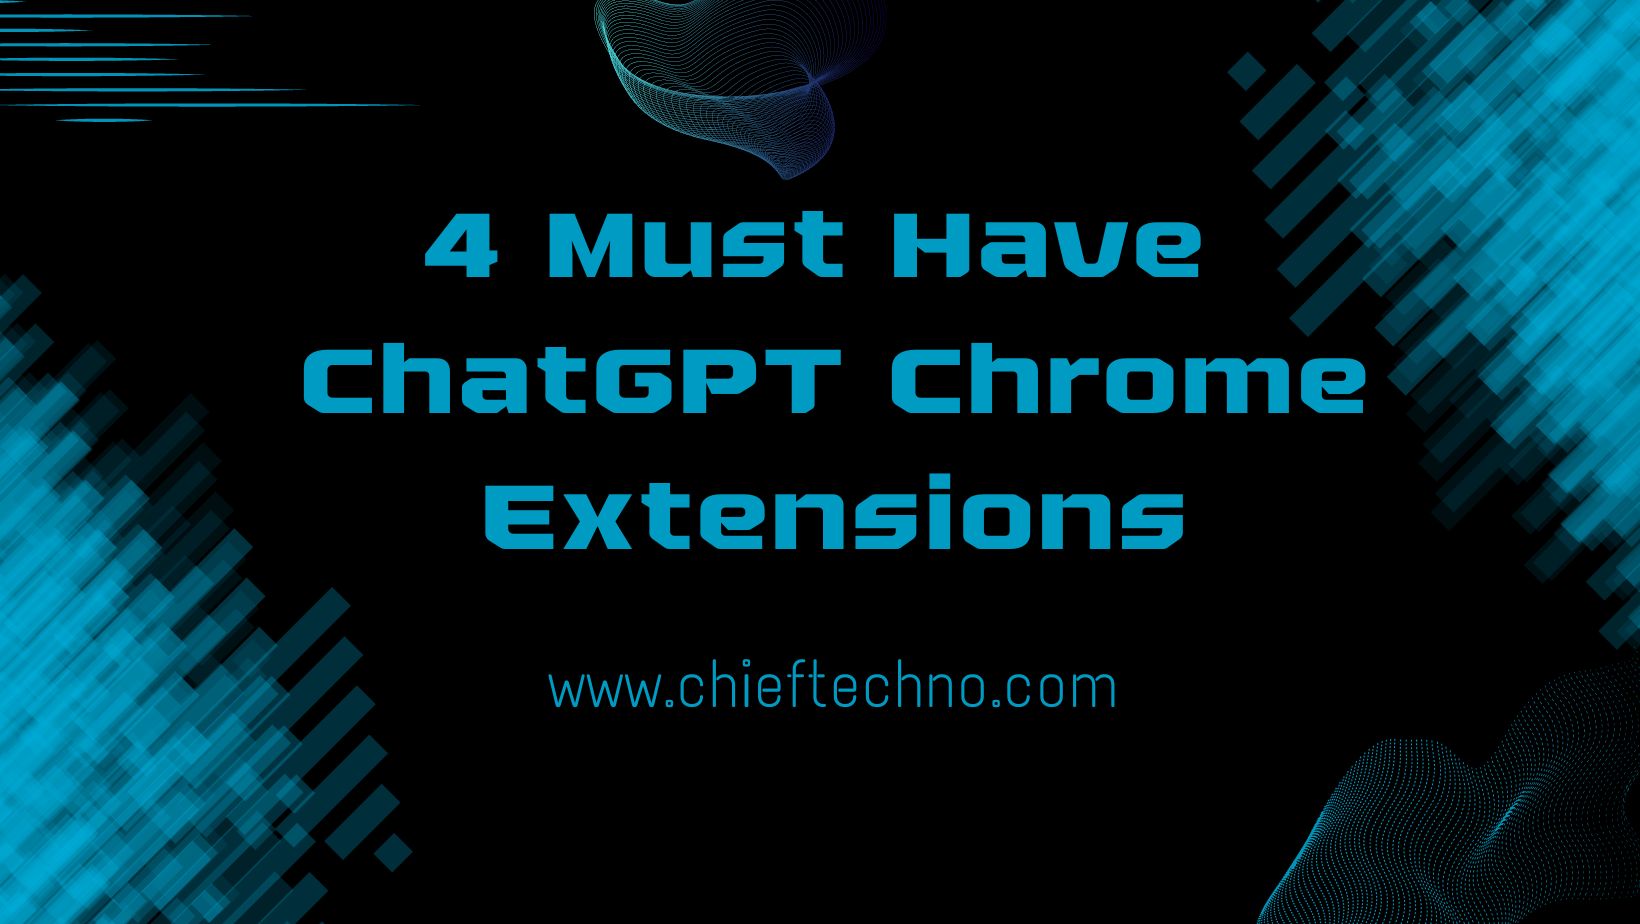 4 Must Have ChatGPT Chrome Extensions